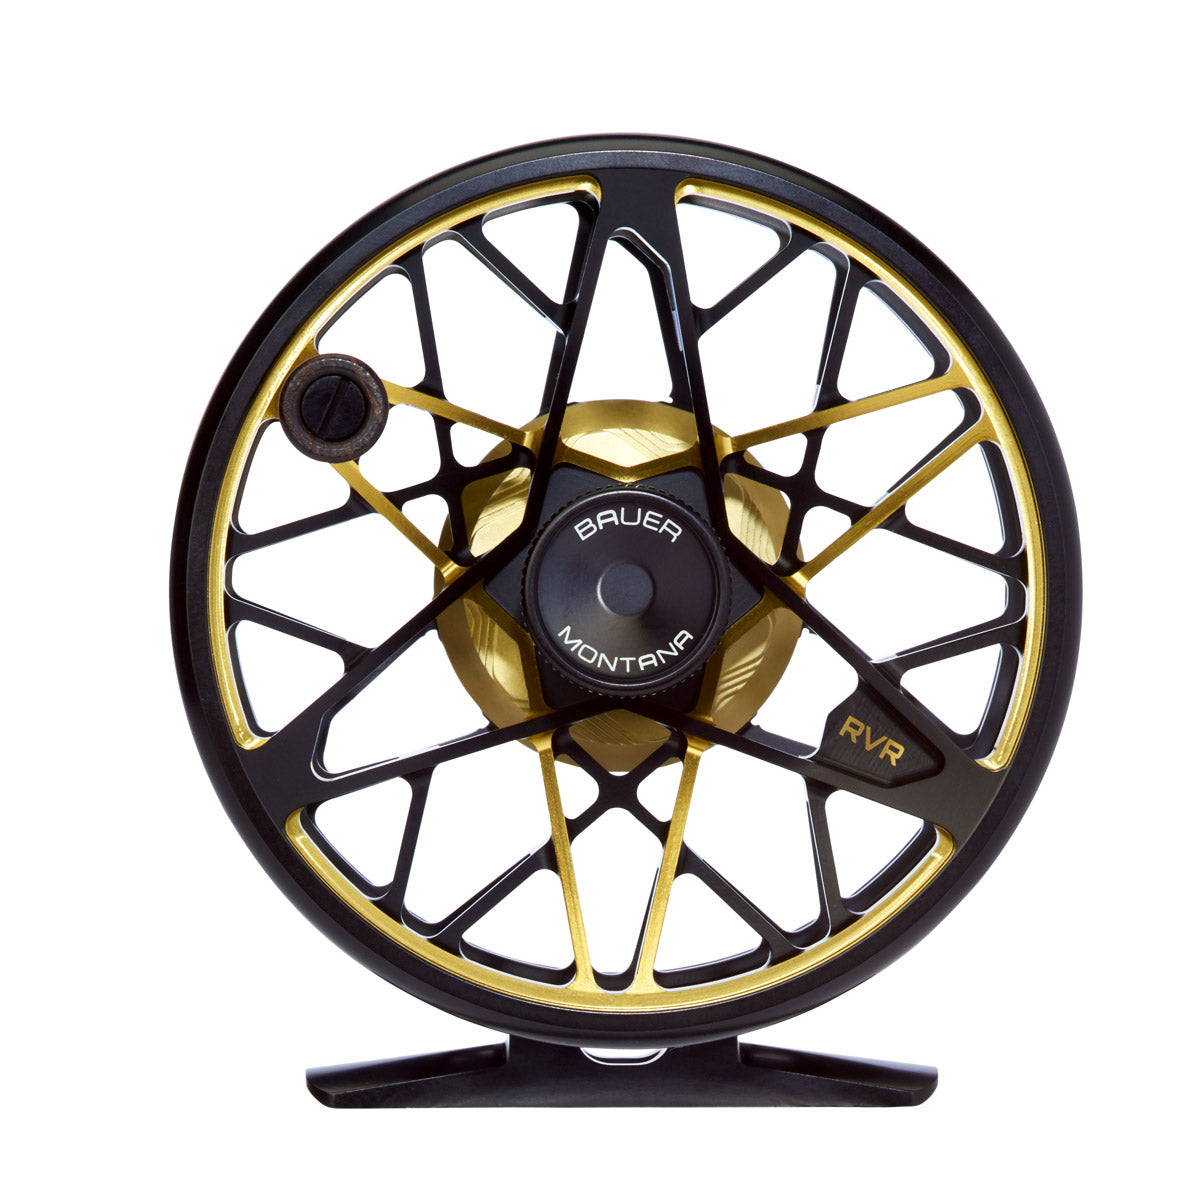 Bauer RVR Fly Fishing Reel Size 2/3 Wt Misc Bauer Fly Fishing – The Gear  Attic